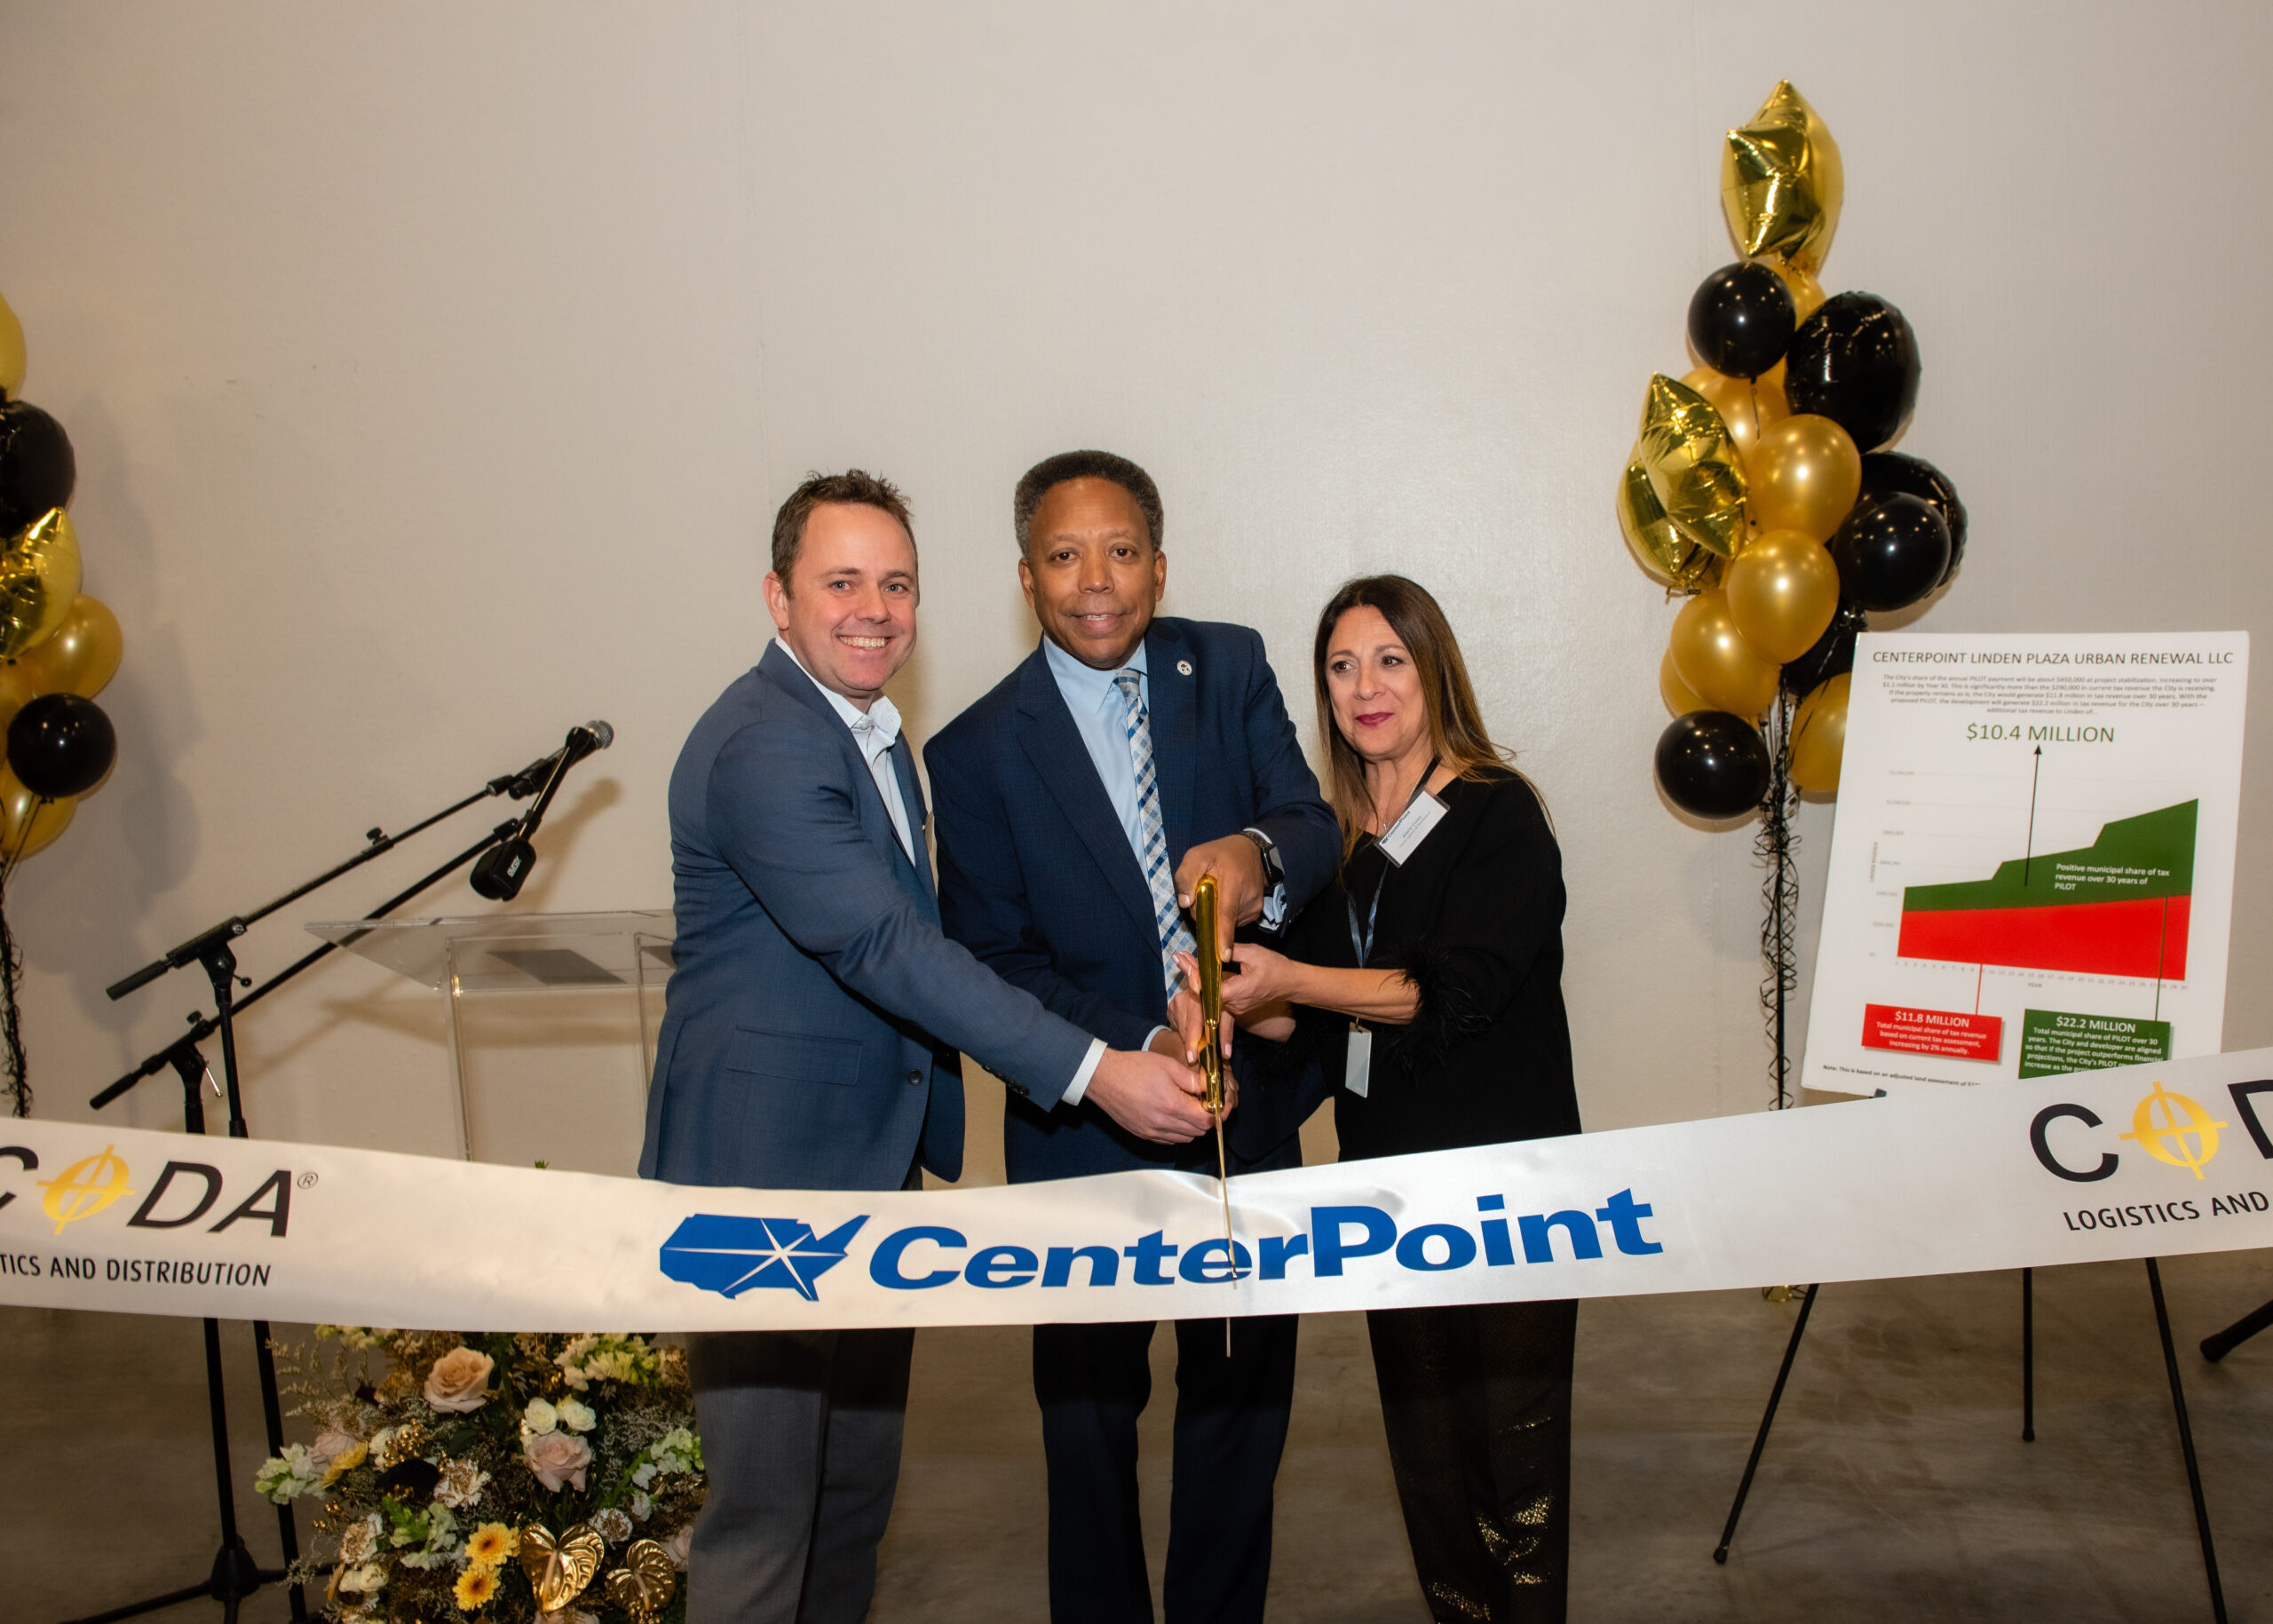 CenterPoint, New Jersey 3PL Cut Ribbon on  Newly Completed Distribution Facility Near Port Newark Image